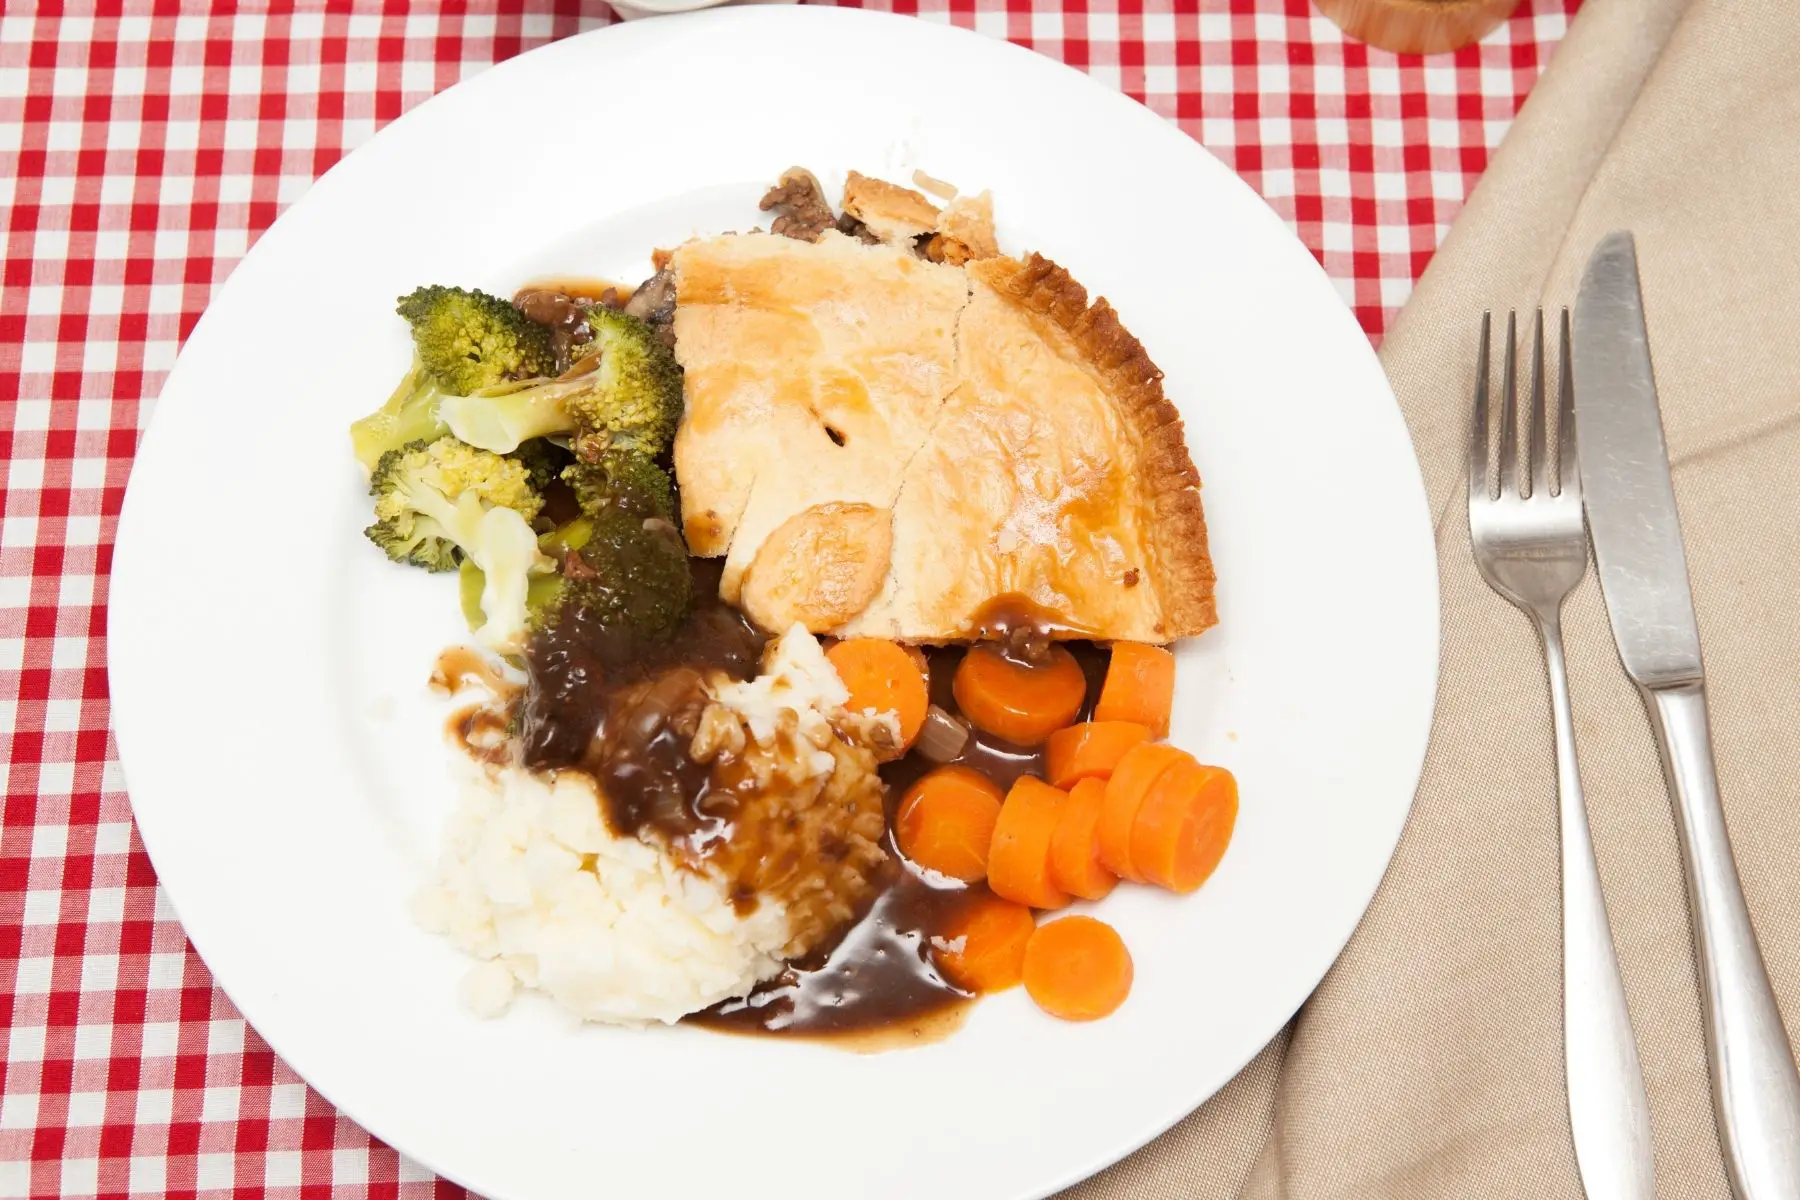 Mincemeat Pie with side dishes